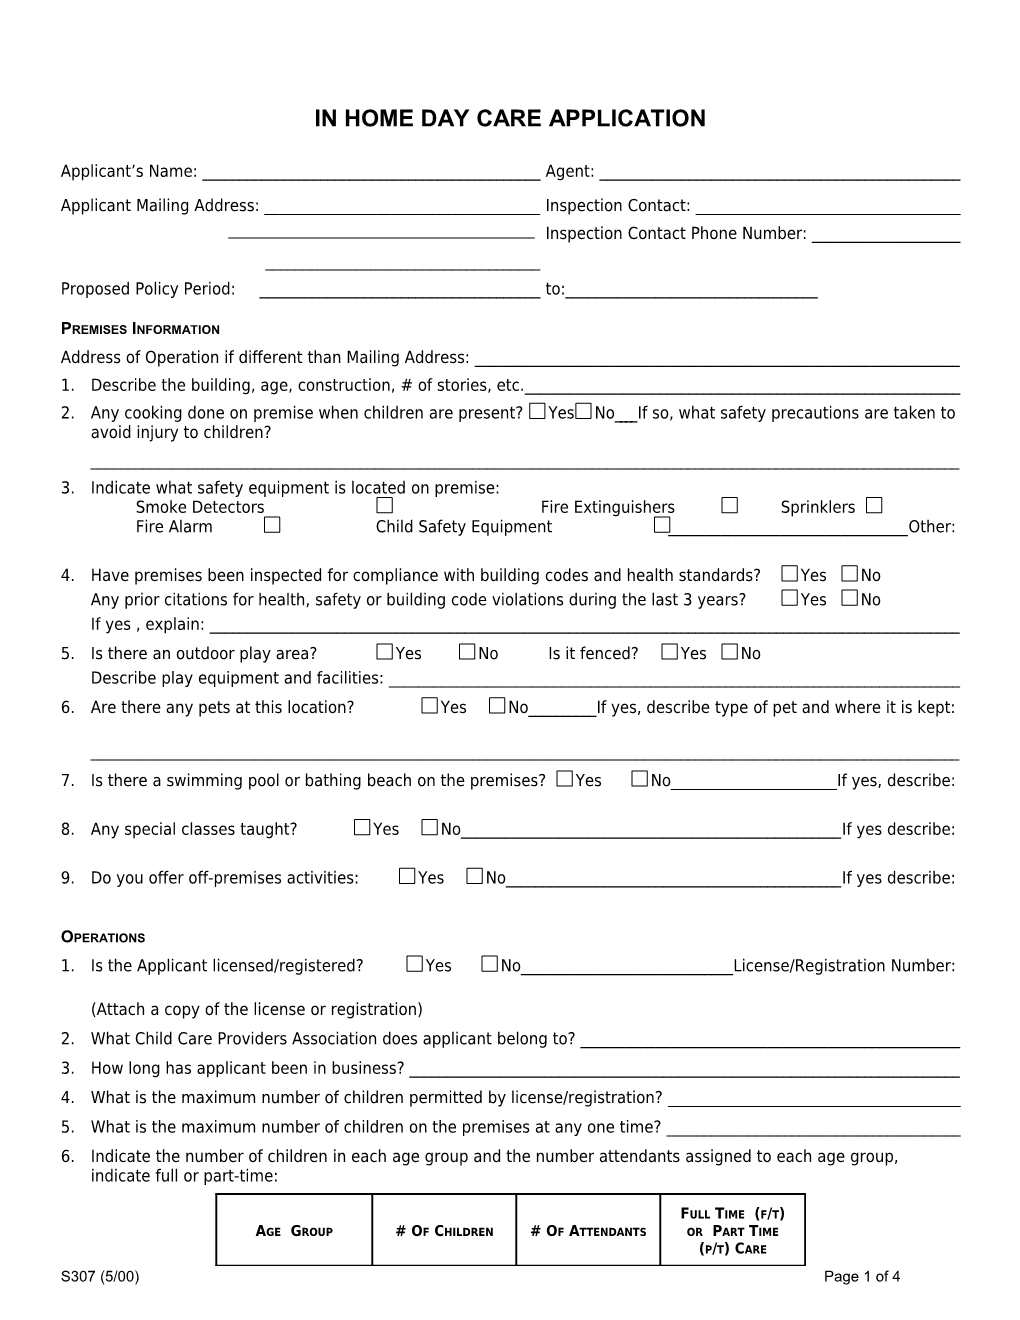 In Home Day Care Application